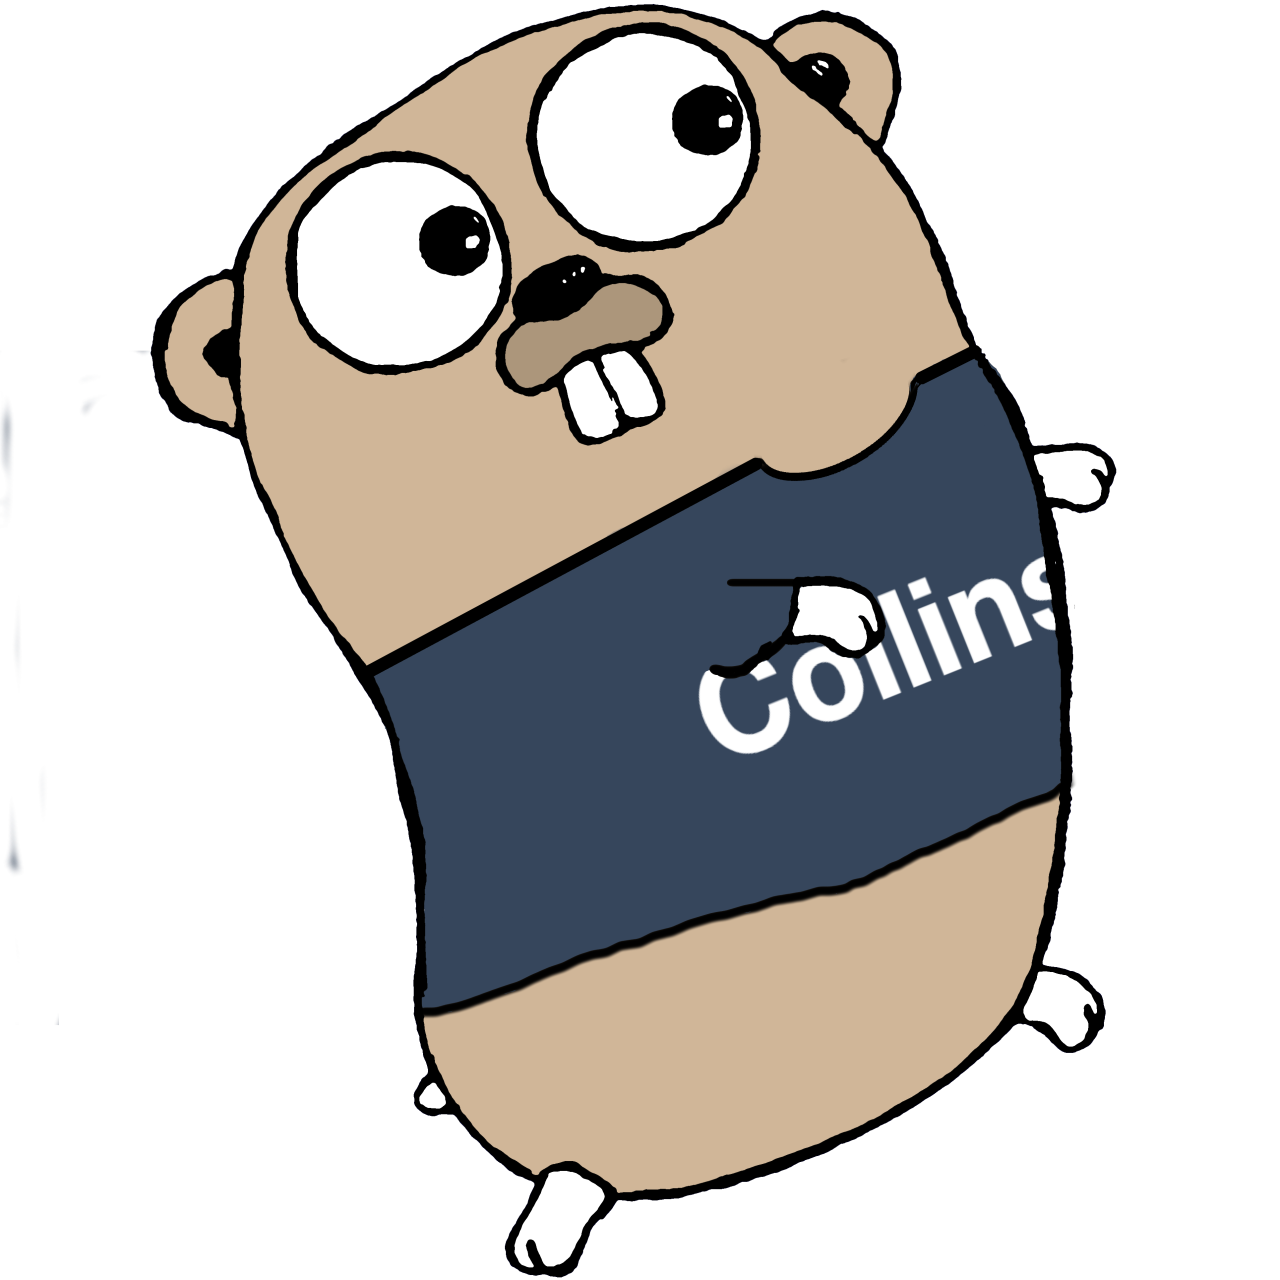 Hole clipart gopher. Tumblr engineering collins and